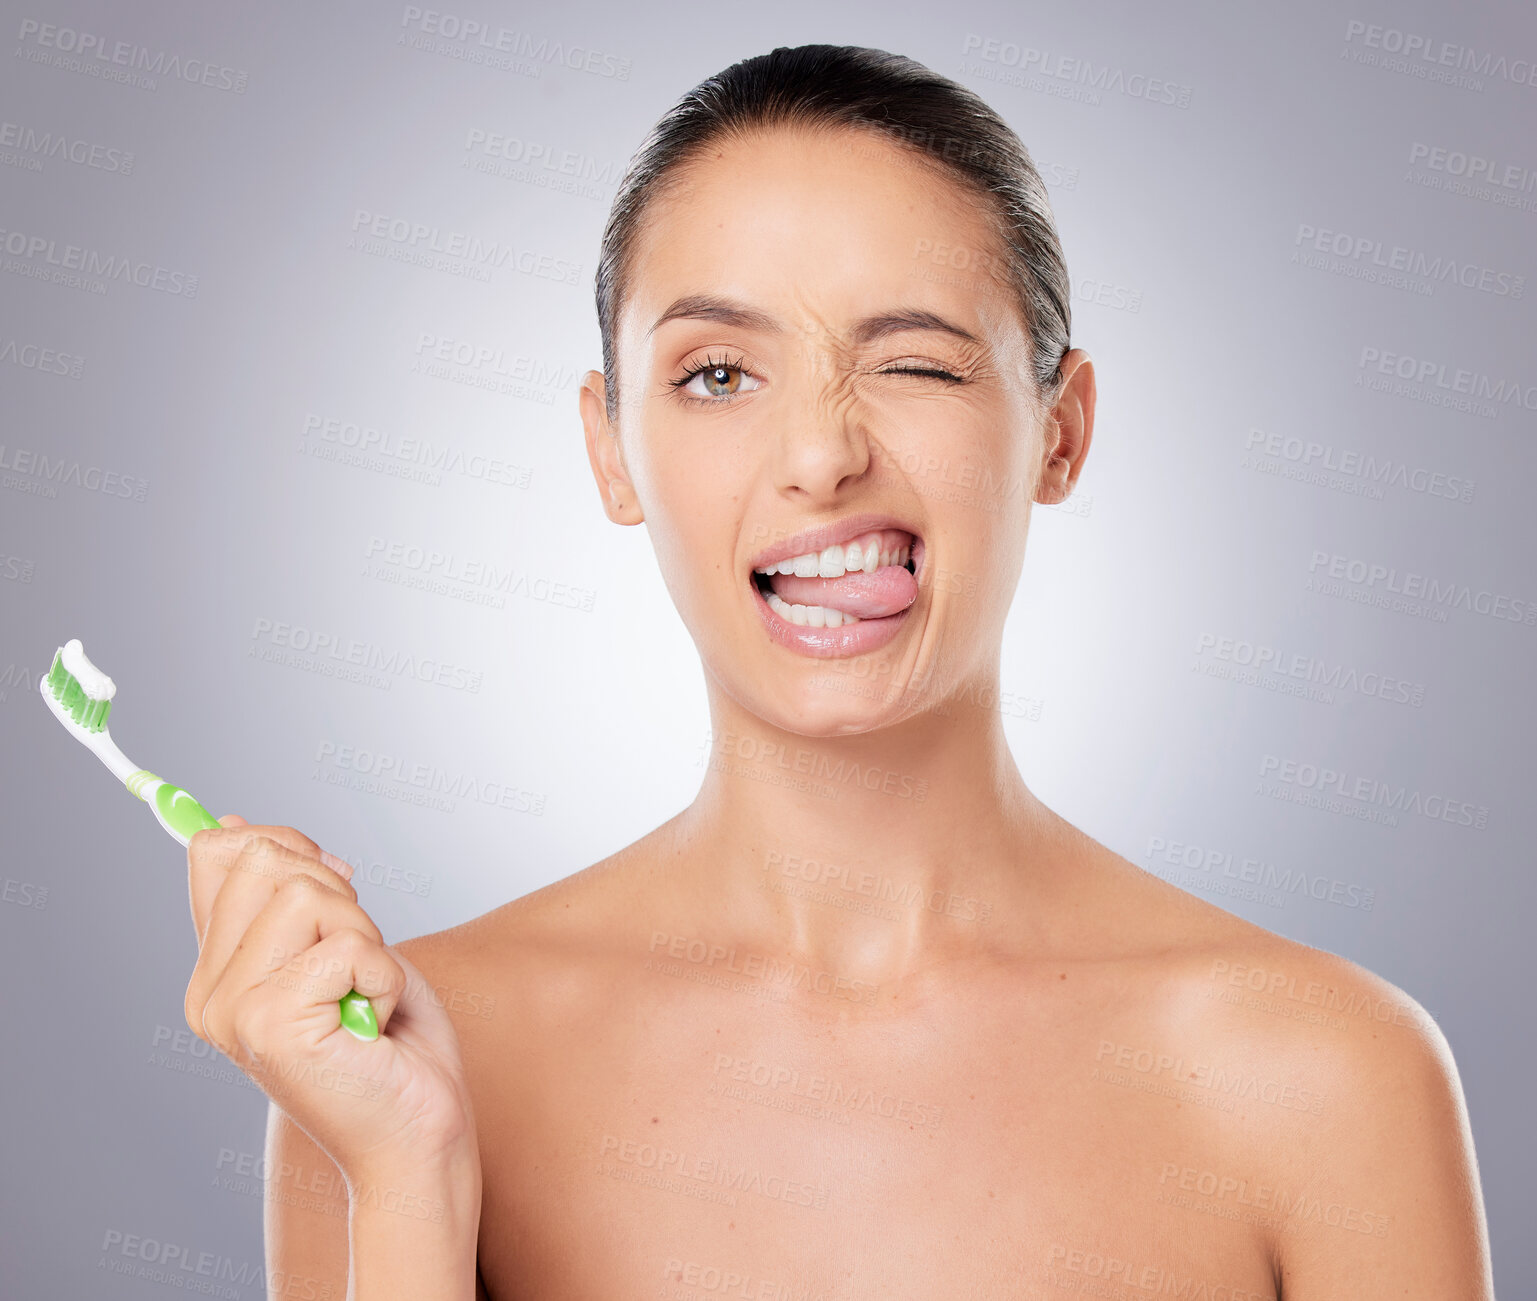 Buy stock photo Shot of a beautiful young woman brushing her teeth against a grey background